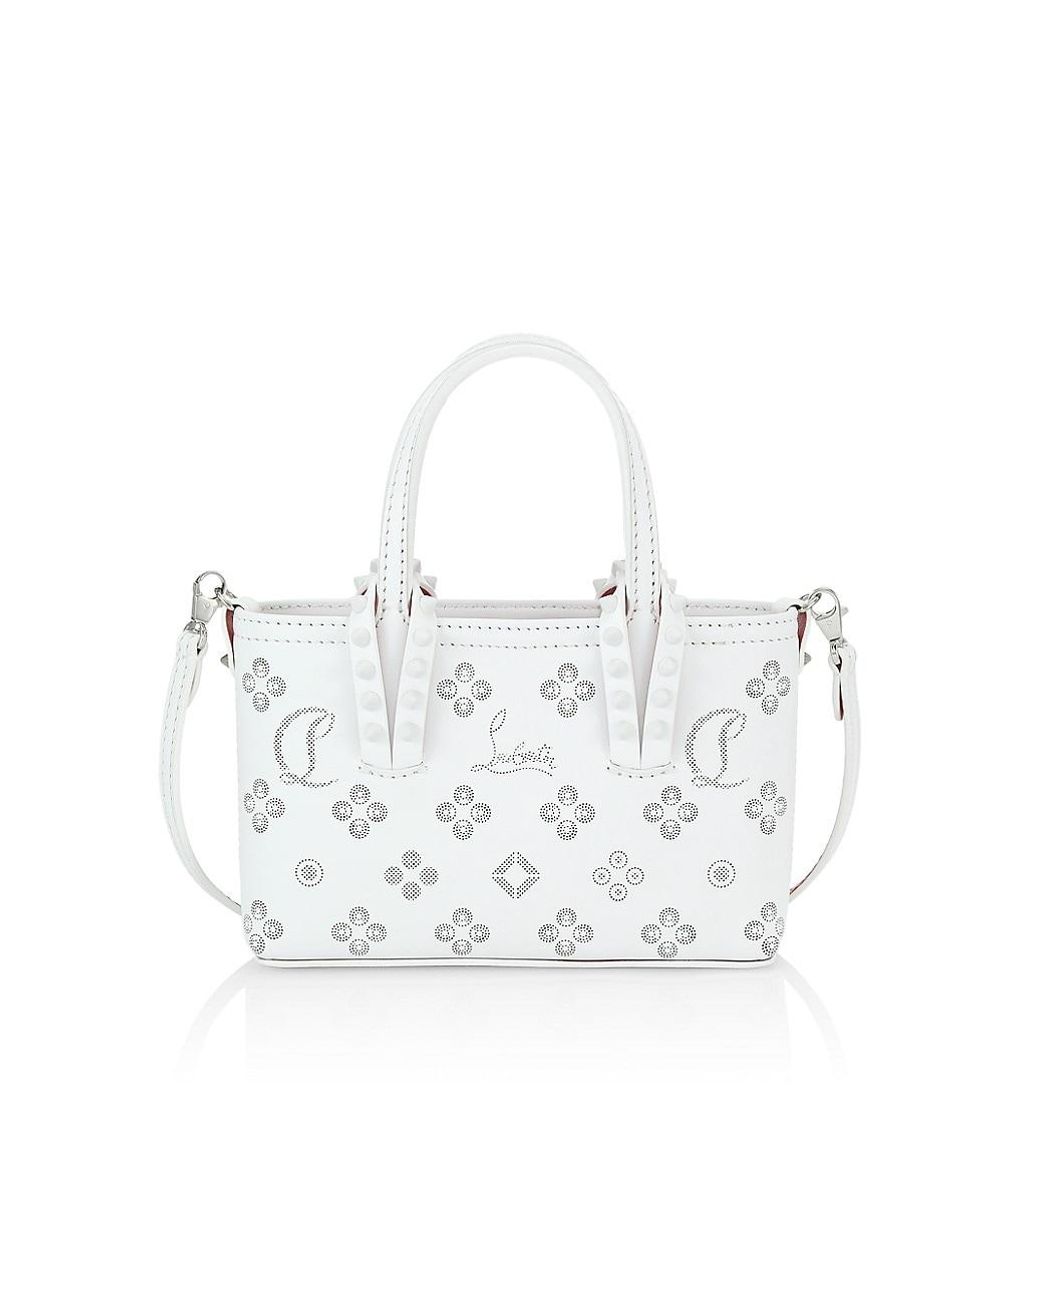 Christian Louboutin Cabata Perforated Leather Tote in White | Lyst